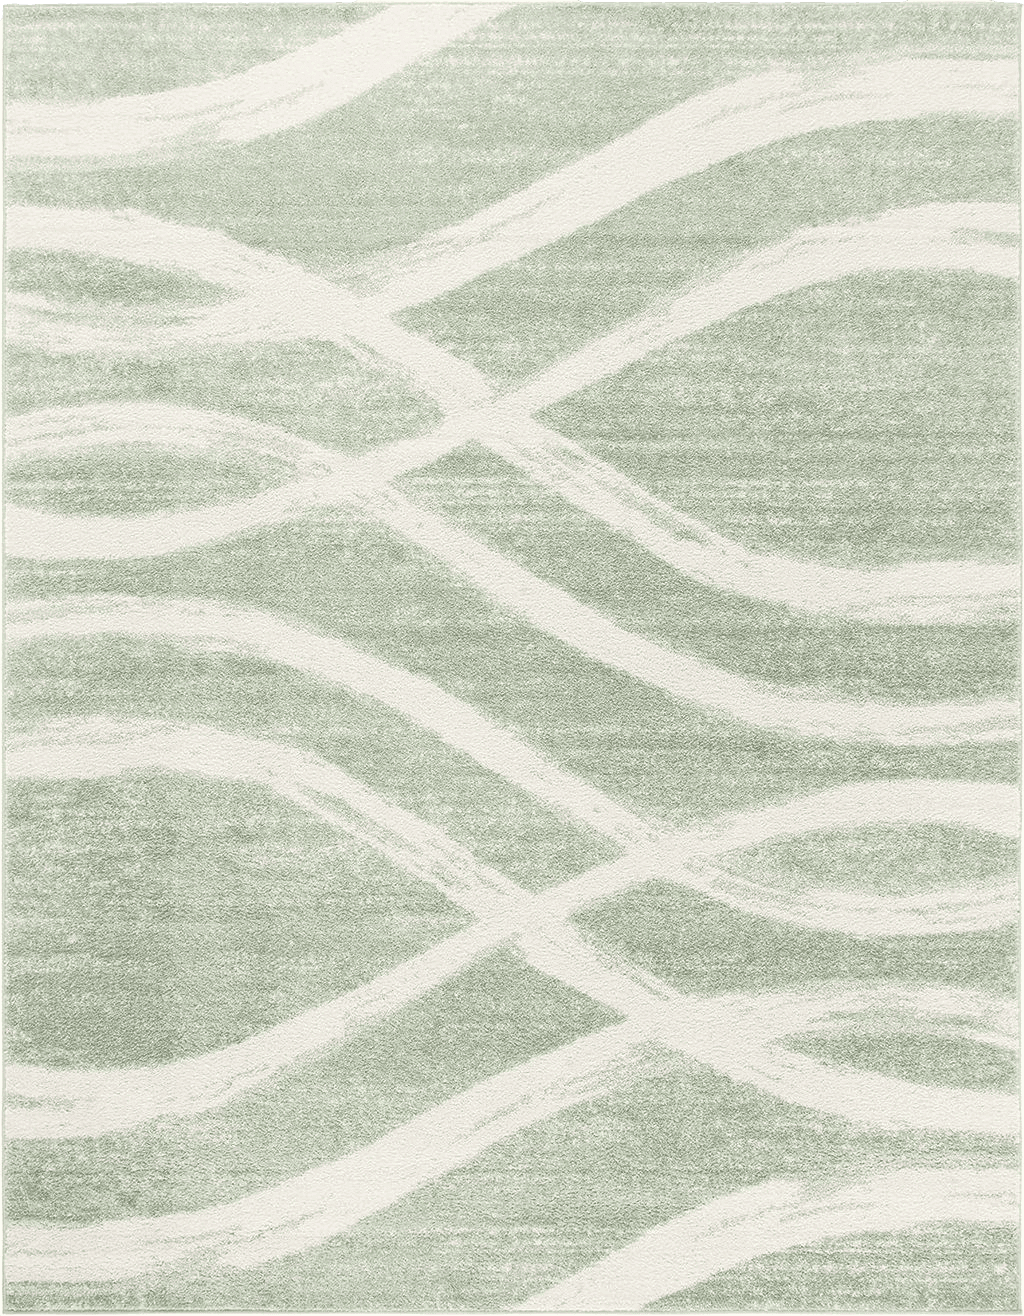 SAFAVIEH Adirondack Collection Area Rug - 6' x 9', Sage & Cream, Modern Wave Distressed Design, Non-Shedding & Easy Care, Ideal for High Traffic Areas in Living Room, Bedroom (ADR125X)